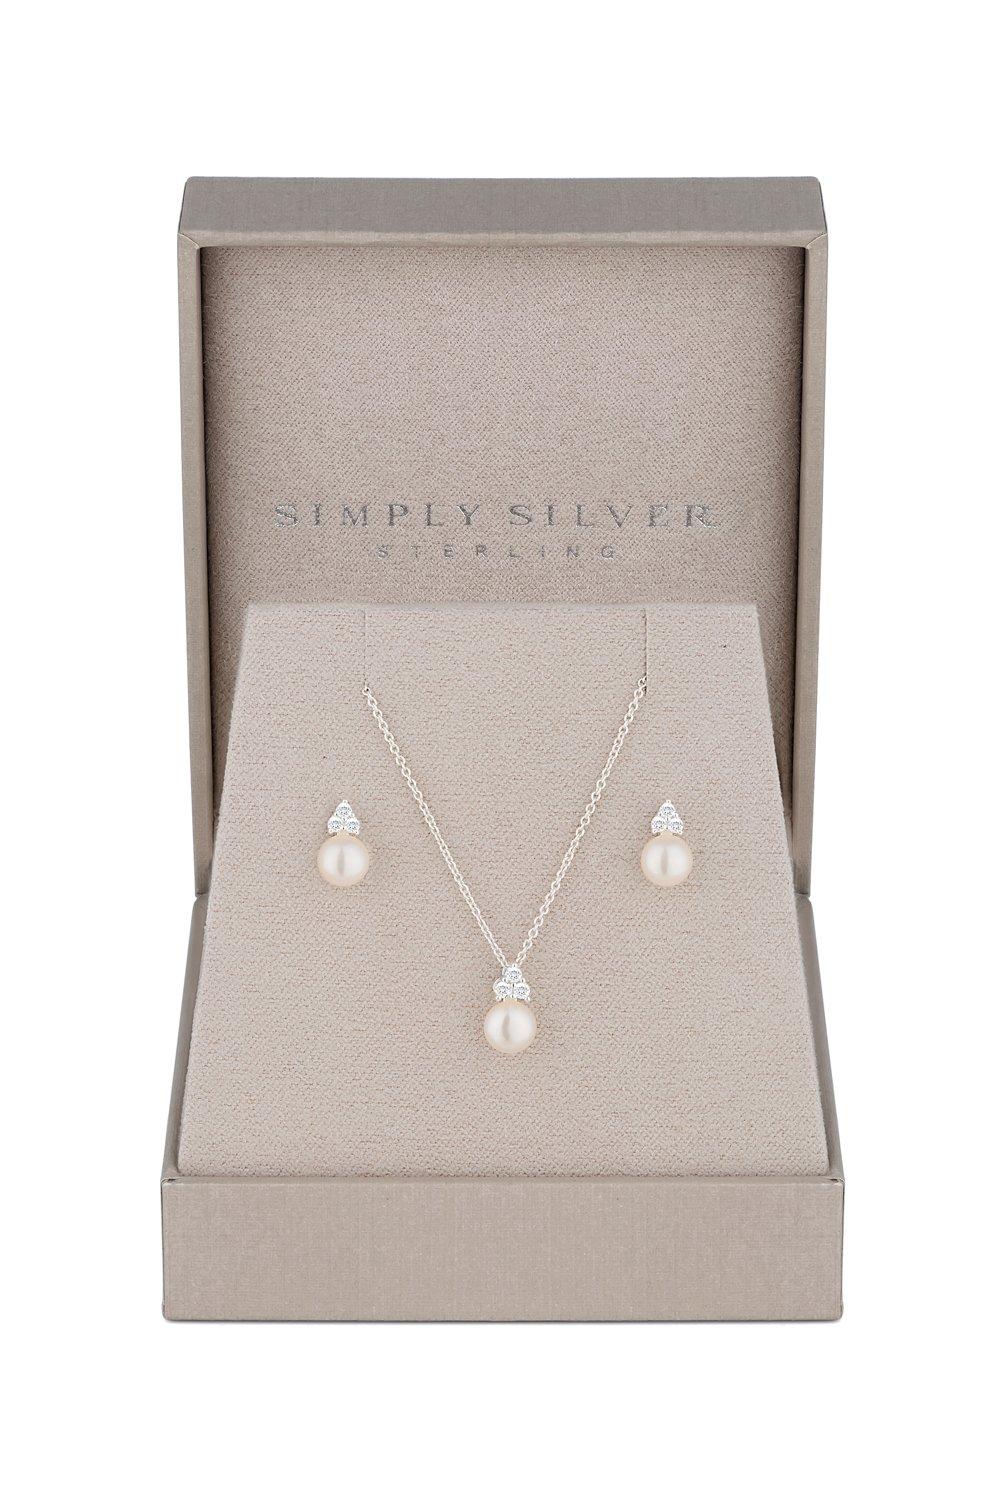 Simply Silver Women's Sterling Silver 925 Freshwater Pearl Set - Gift Boxed|silver